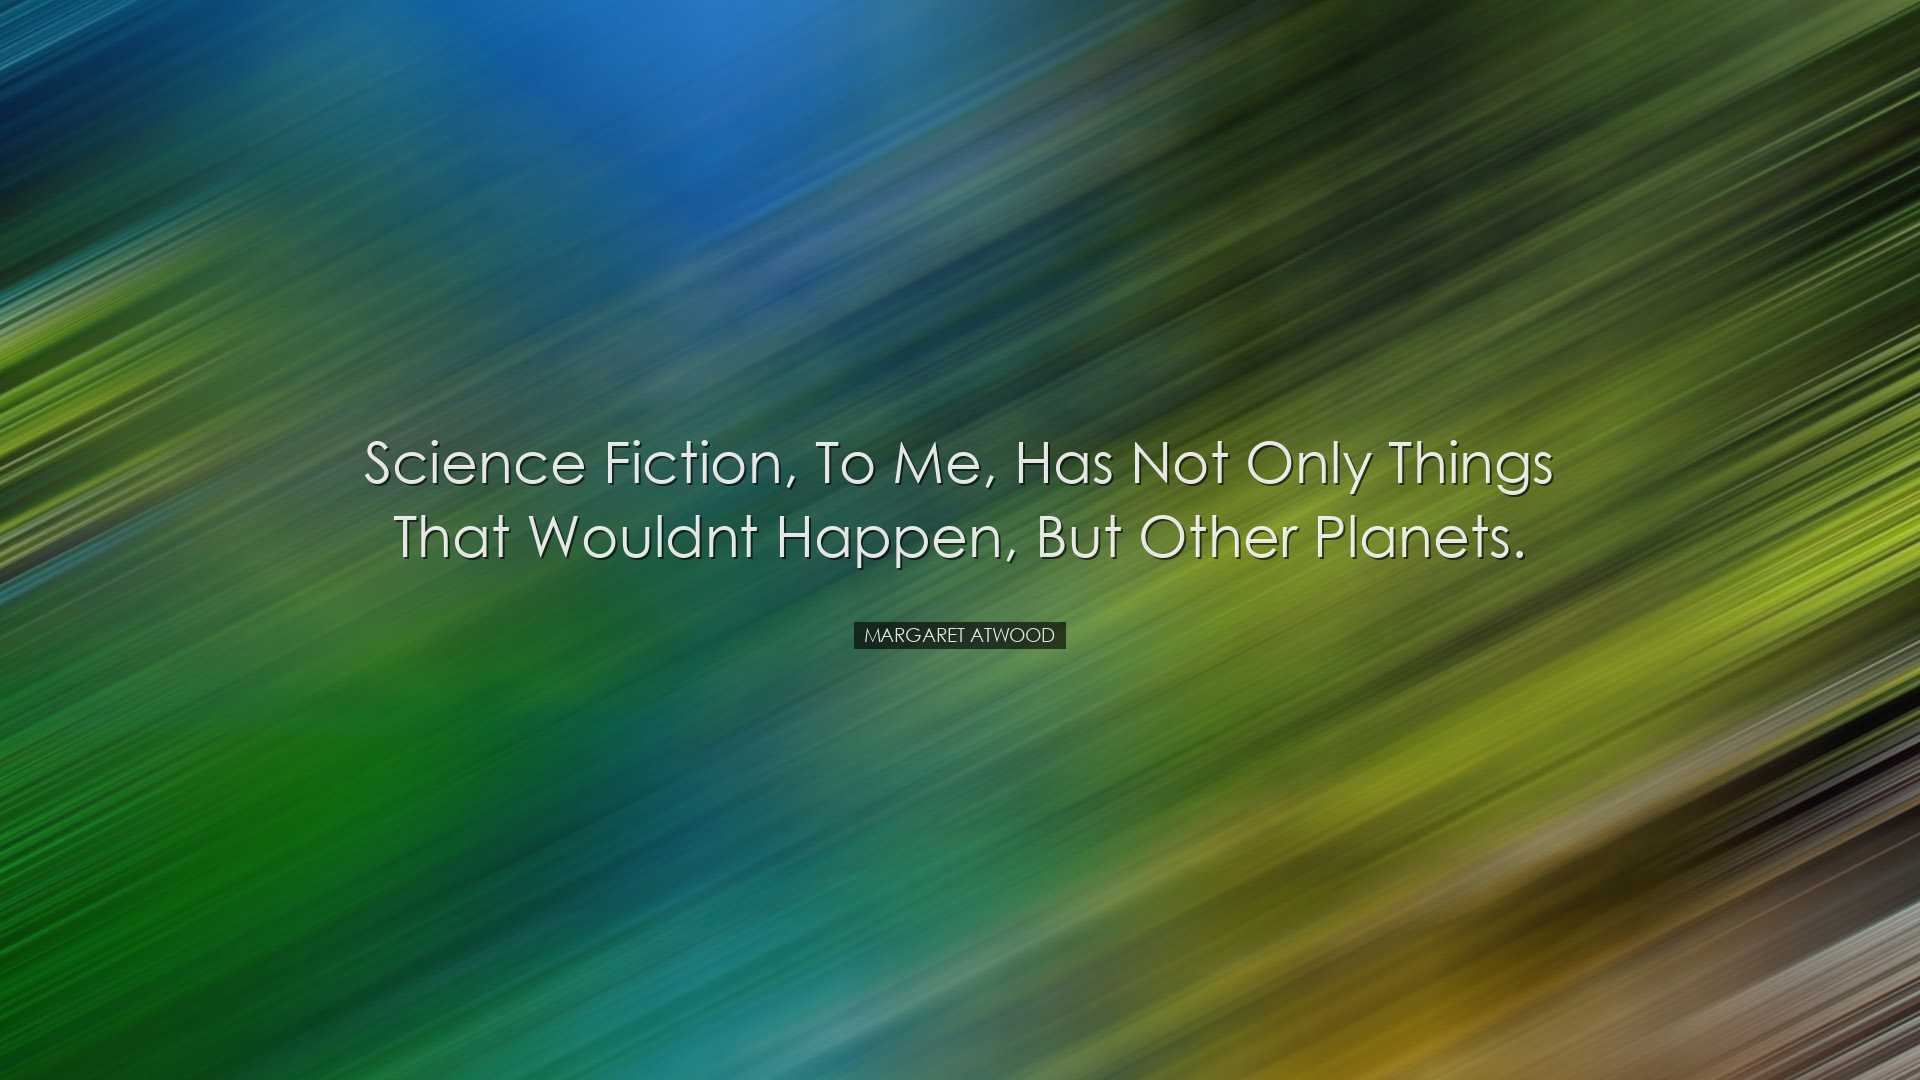 Science fiction, to me, has not only things that wouldnt happen, b